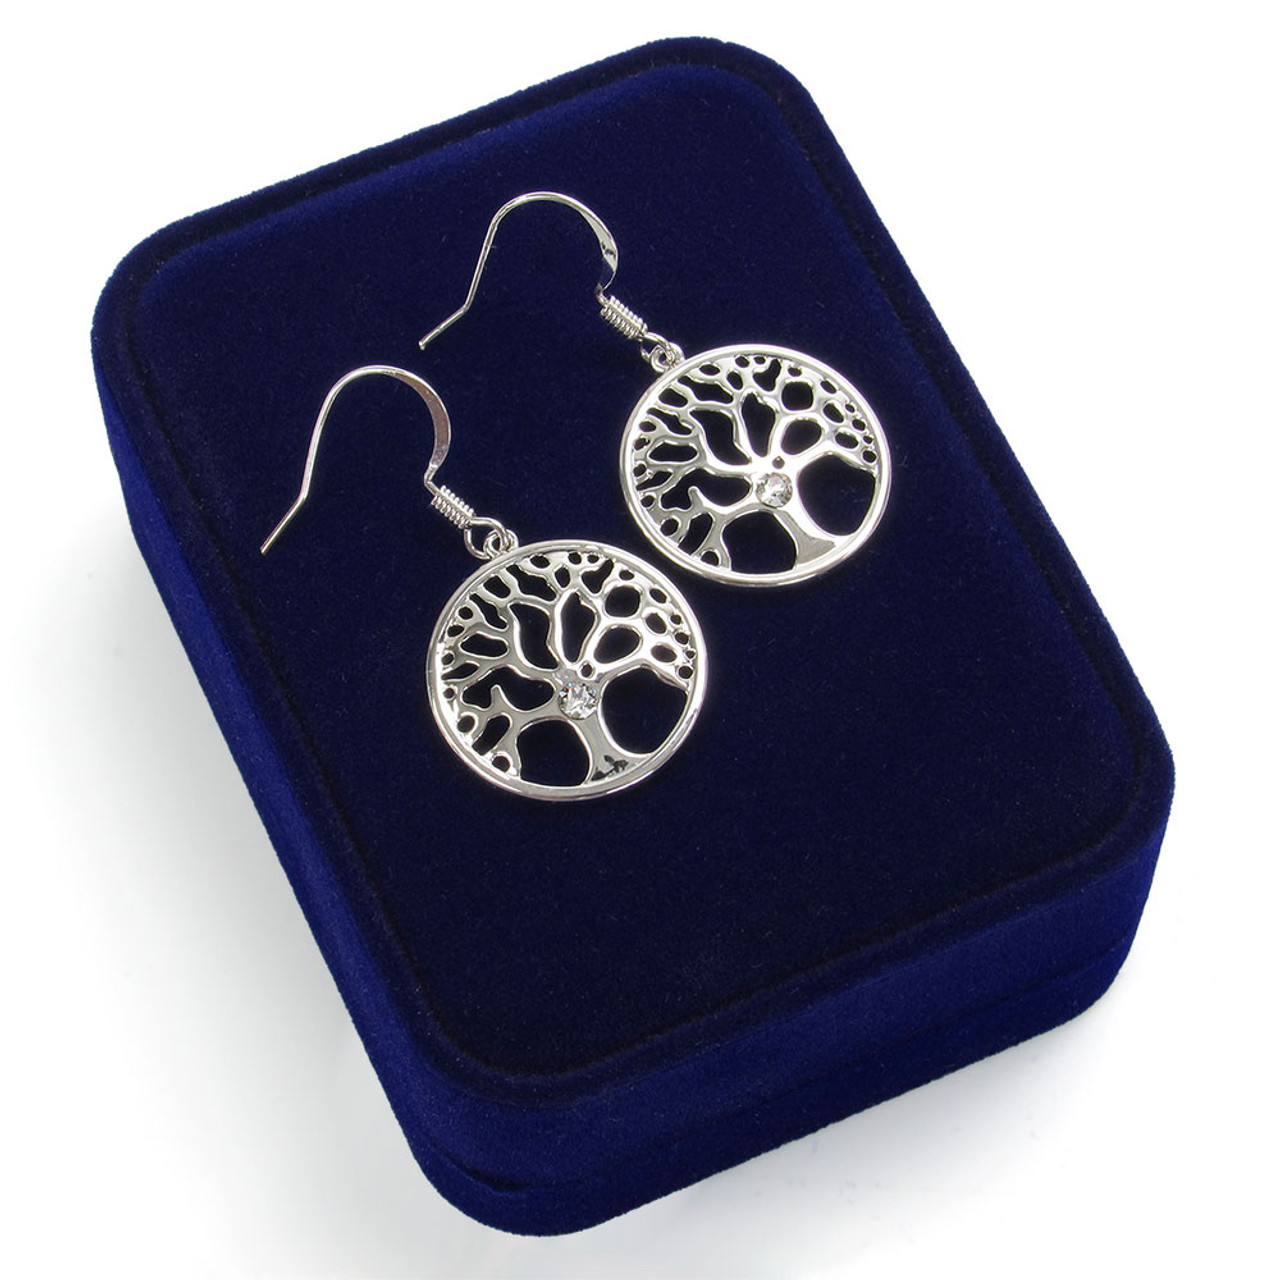 Tree of Life Earrings with Crystals from Swarovski ®